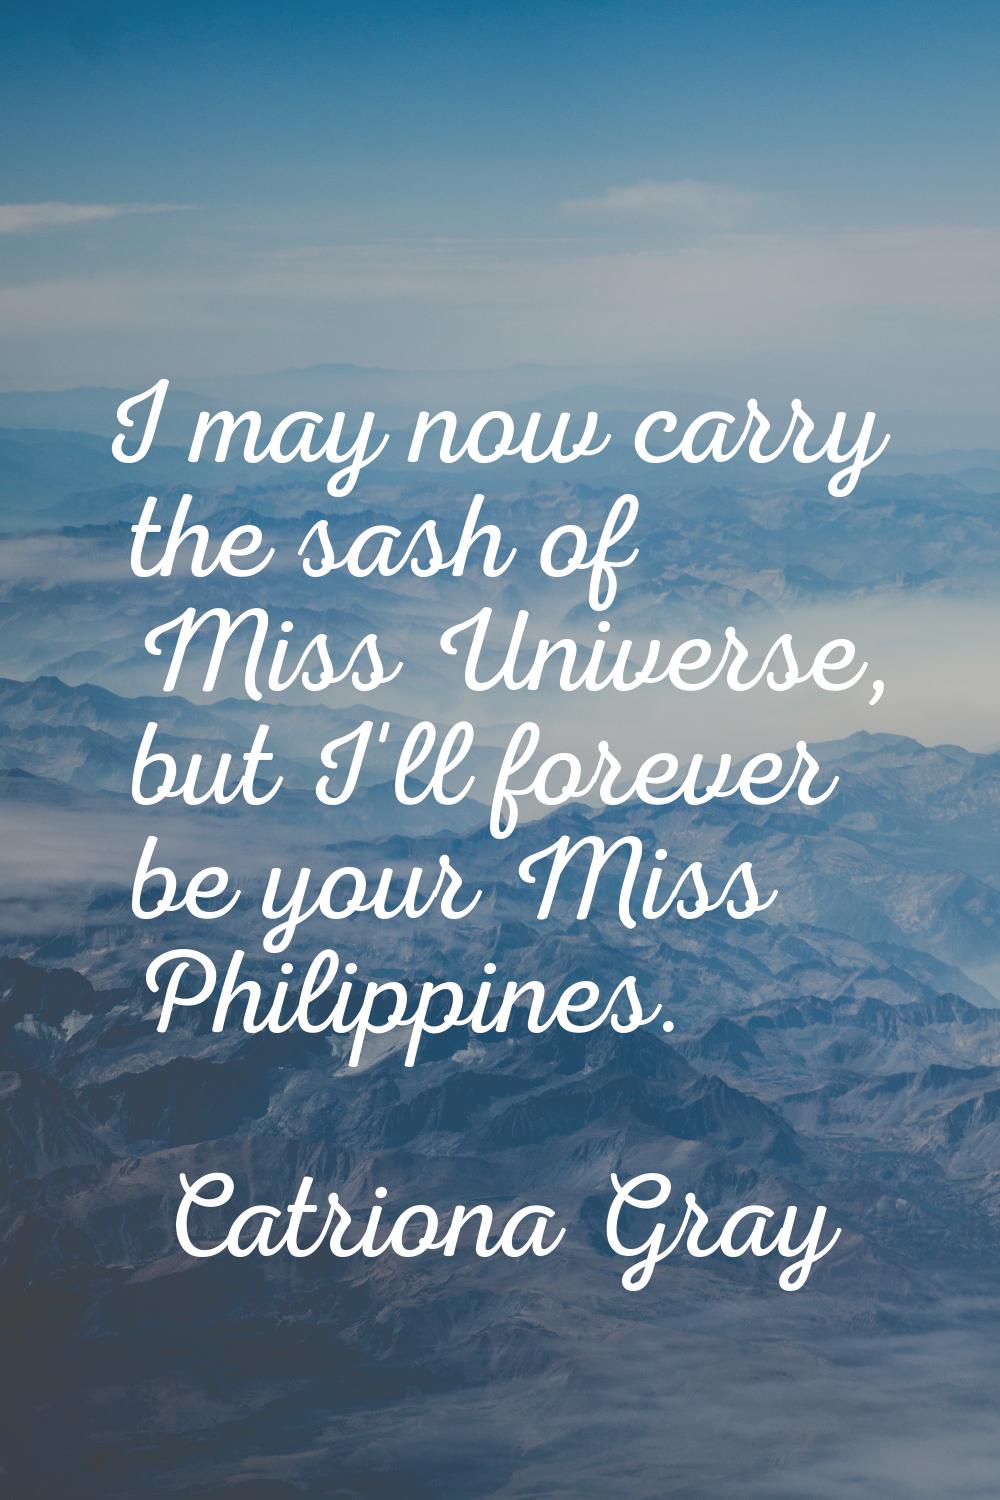 I may now carry the sash of Miss Universe, but I'll forever be your Miss Philippines.